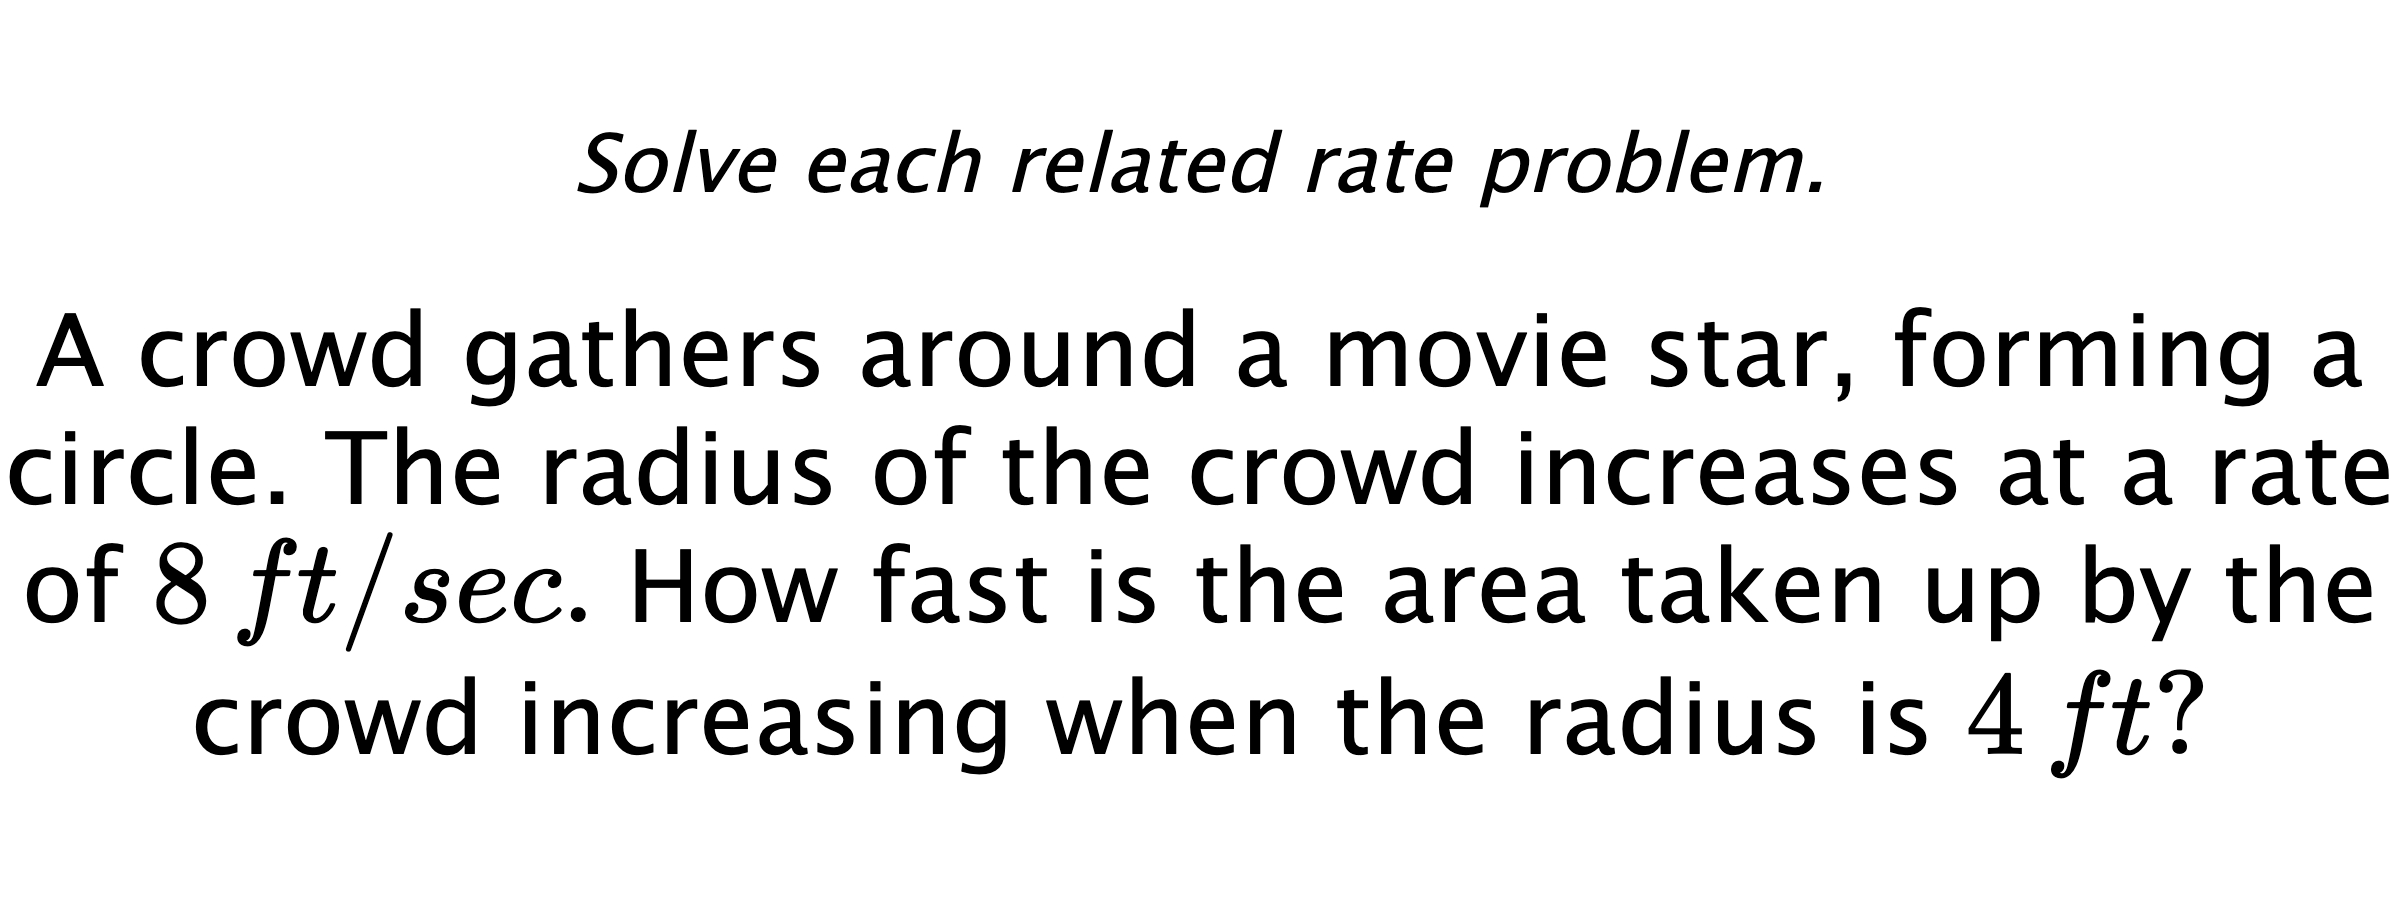 Solve each related rate problem. A crowd gathers around a movie star, forming a circle. The radius of the crowd increases at a rate of $8\,ft/sec.$ How fast is the area taken up by the crowd increasing when the radius is $4\,ft?$